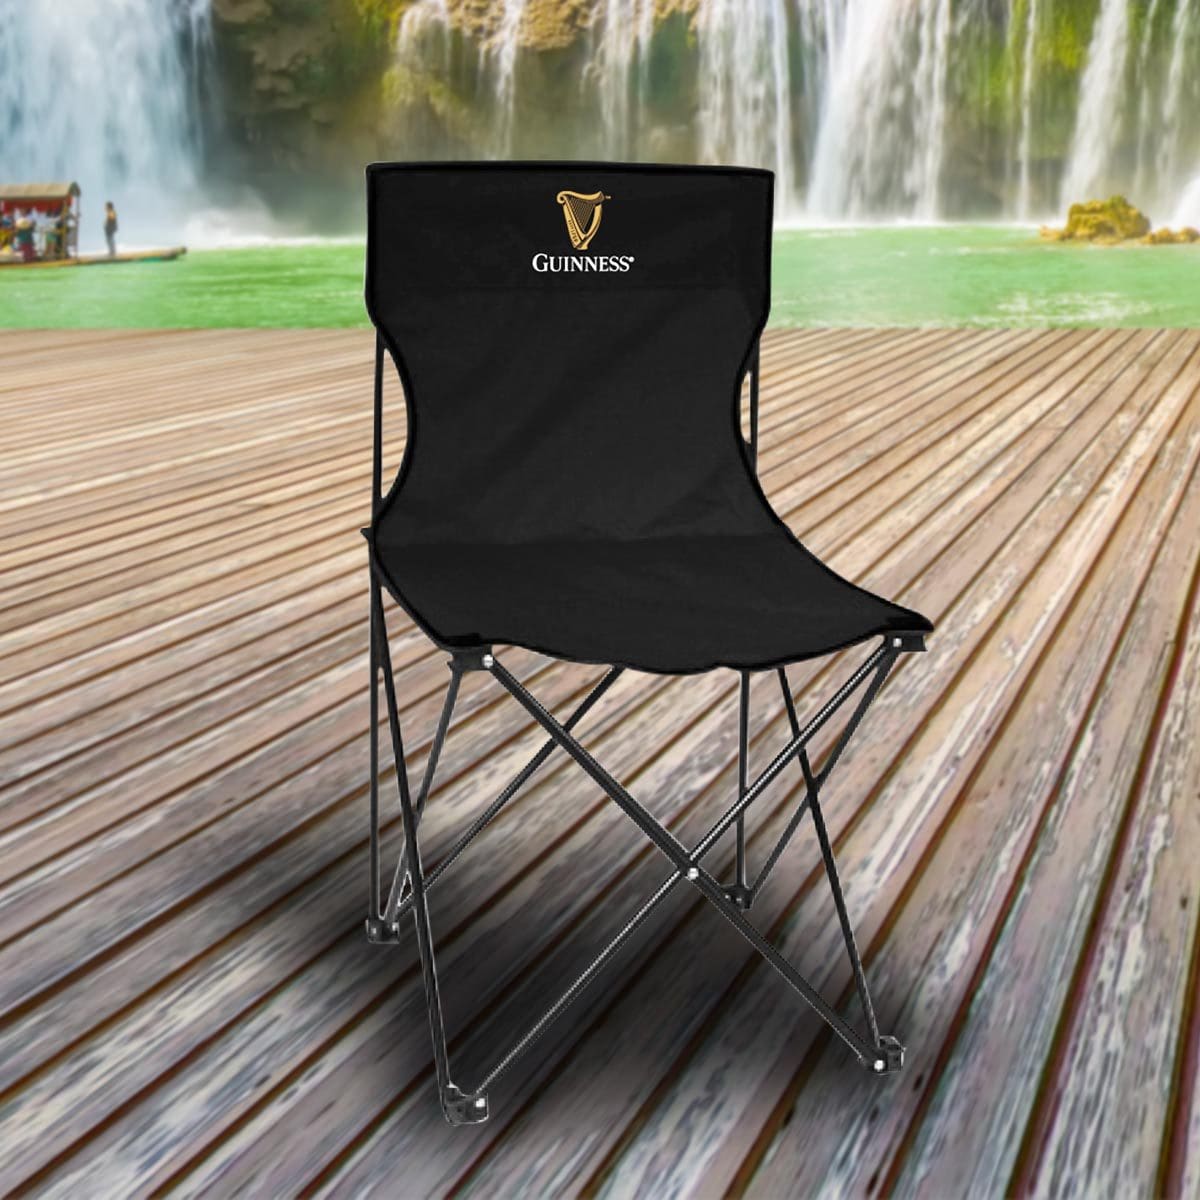 Foldable Picnic Chair